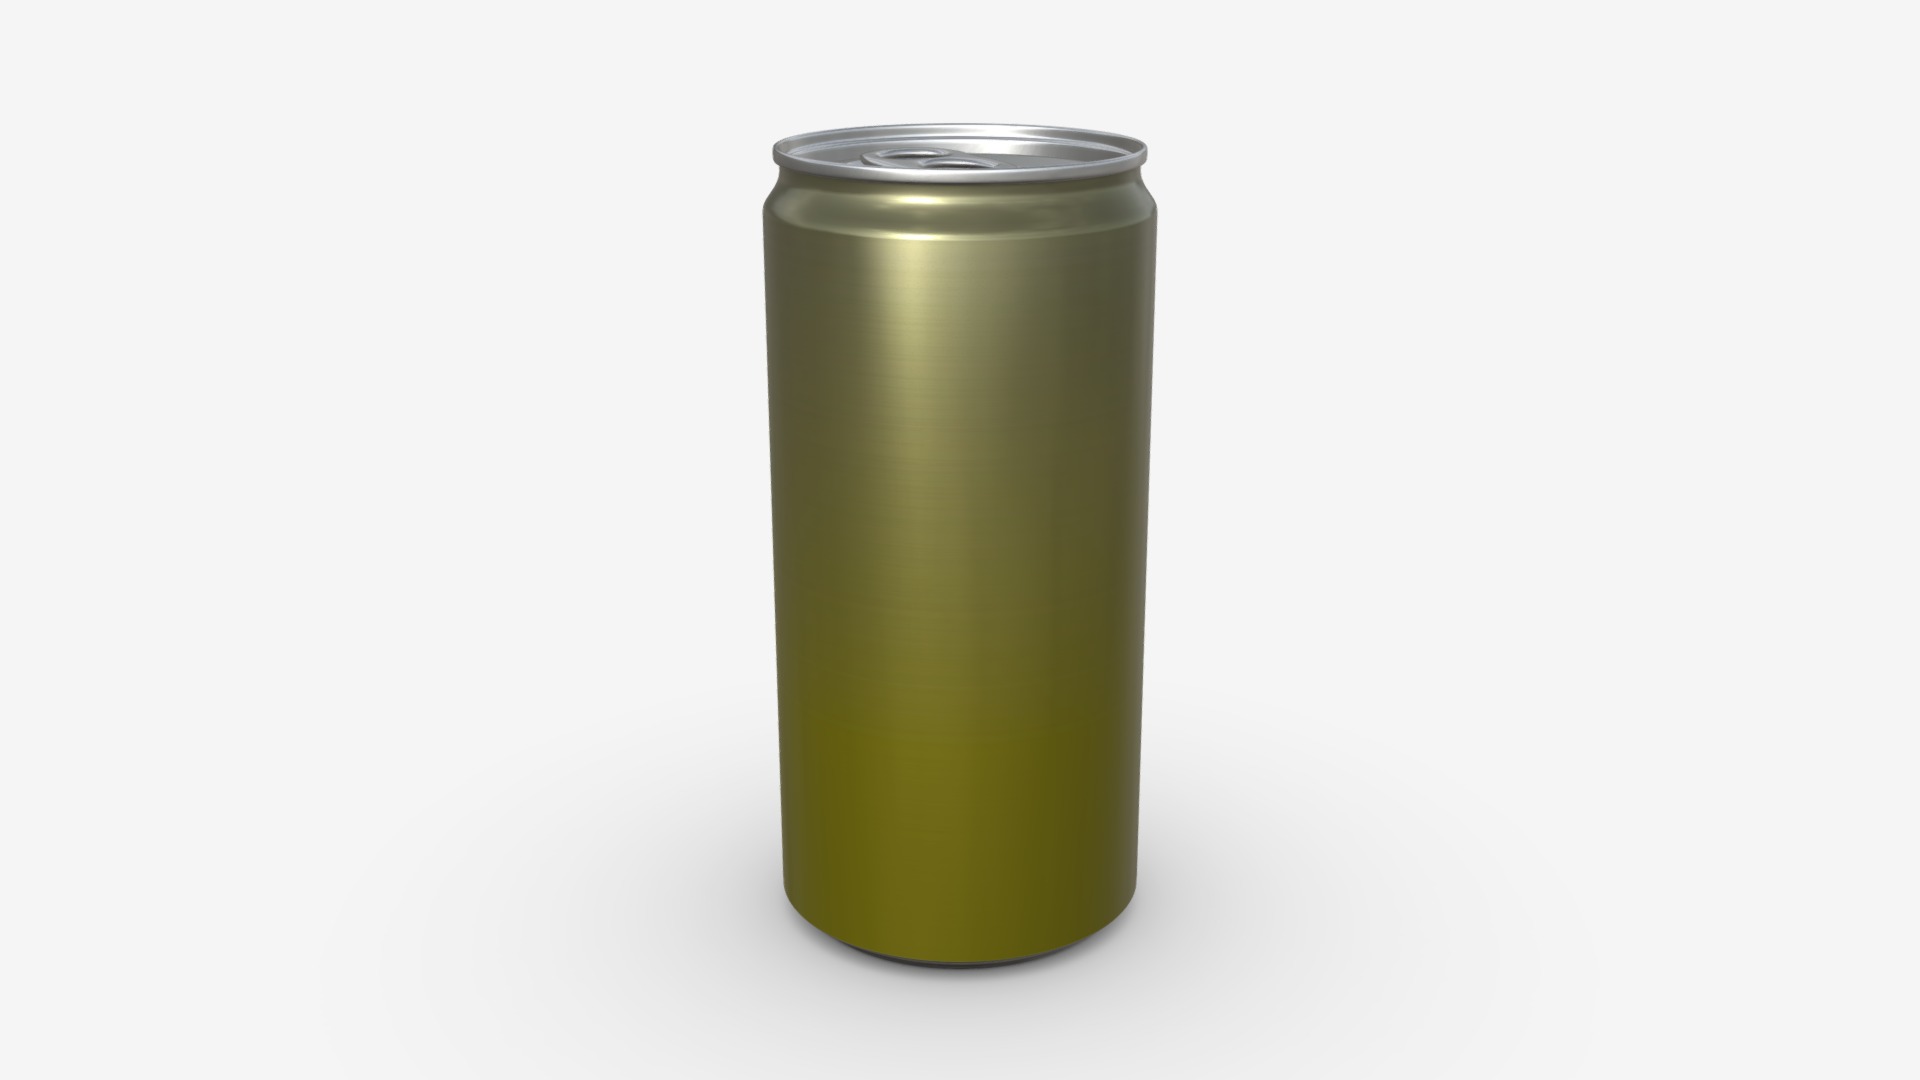 3D model Slim beverage can 200ml 6.76 oz - This is a 3D model of the Slim beverage can 200ml 6.76 oz. The 3D model is about a green cylindrical container.